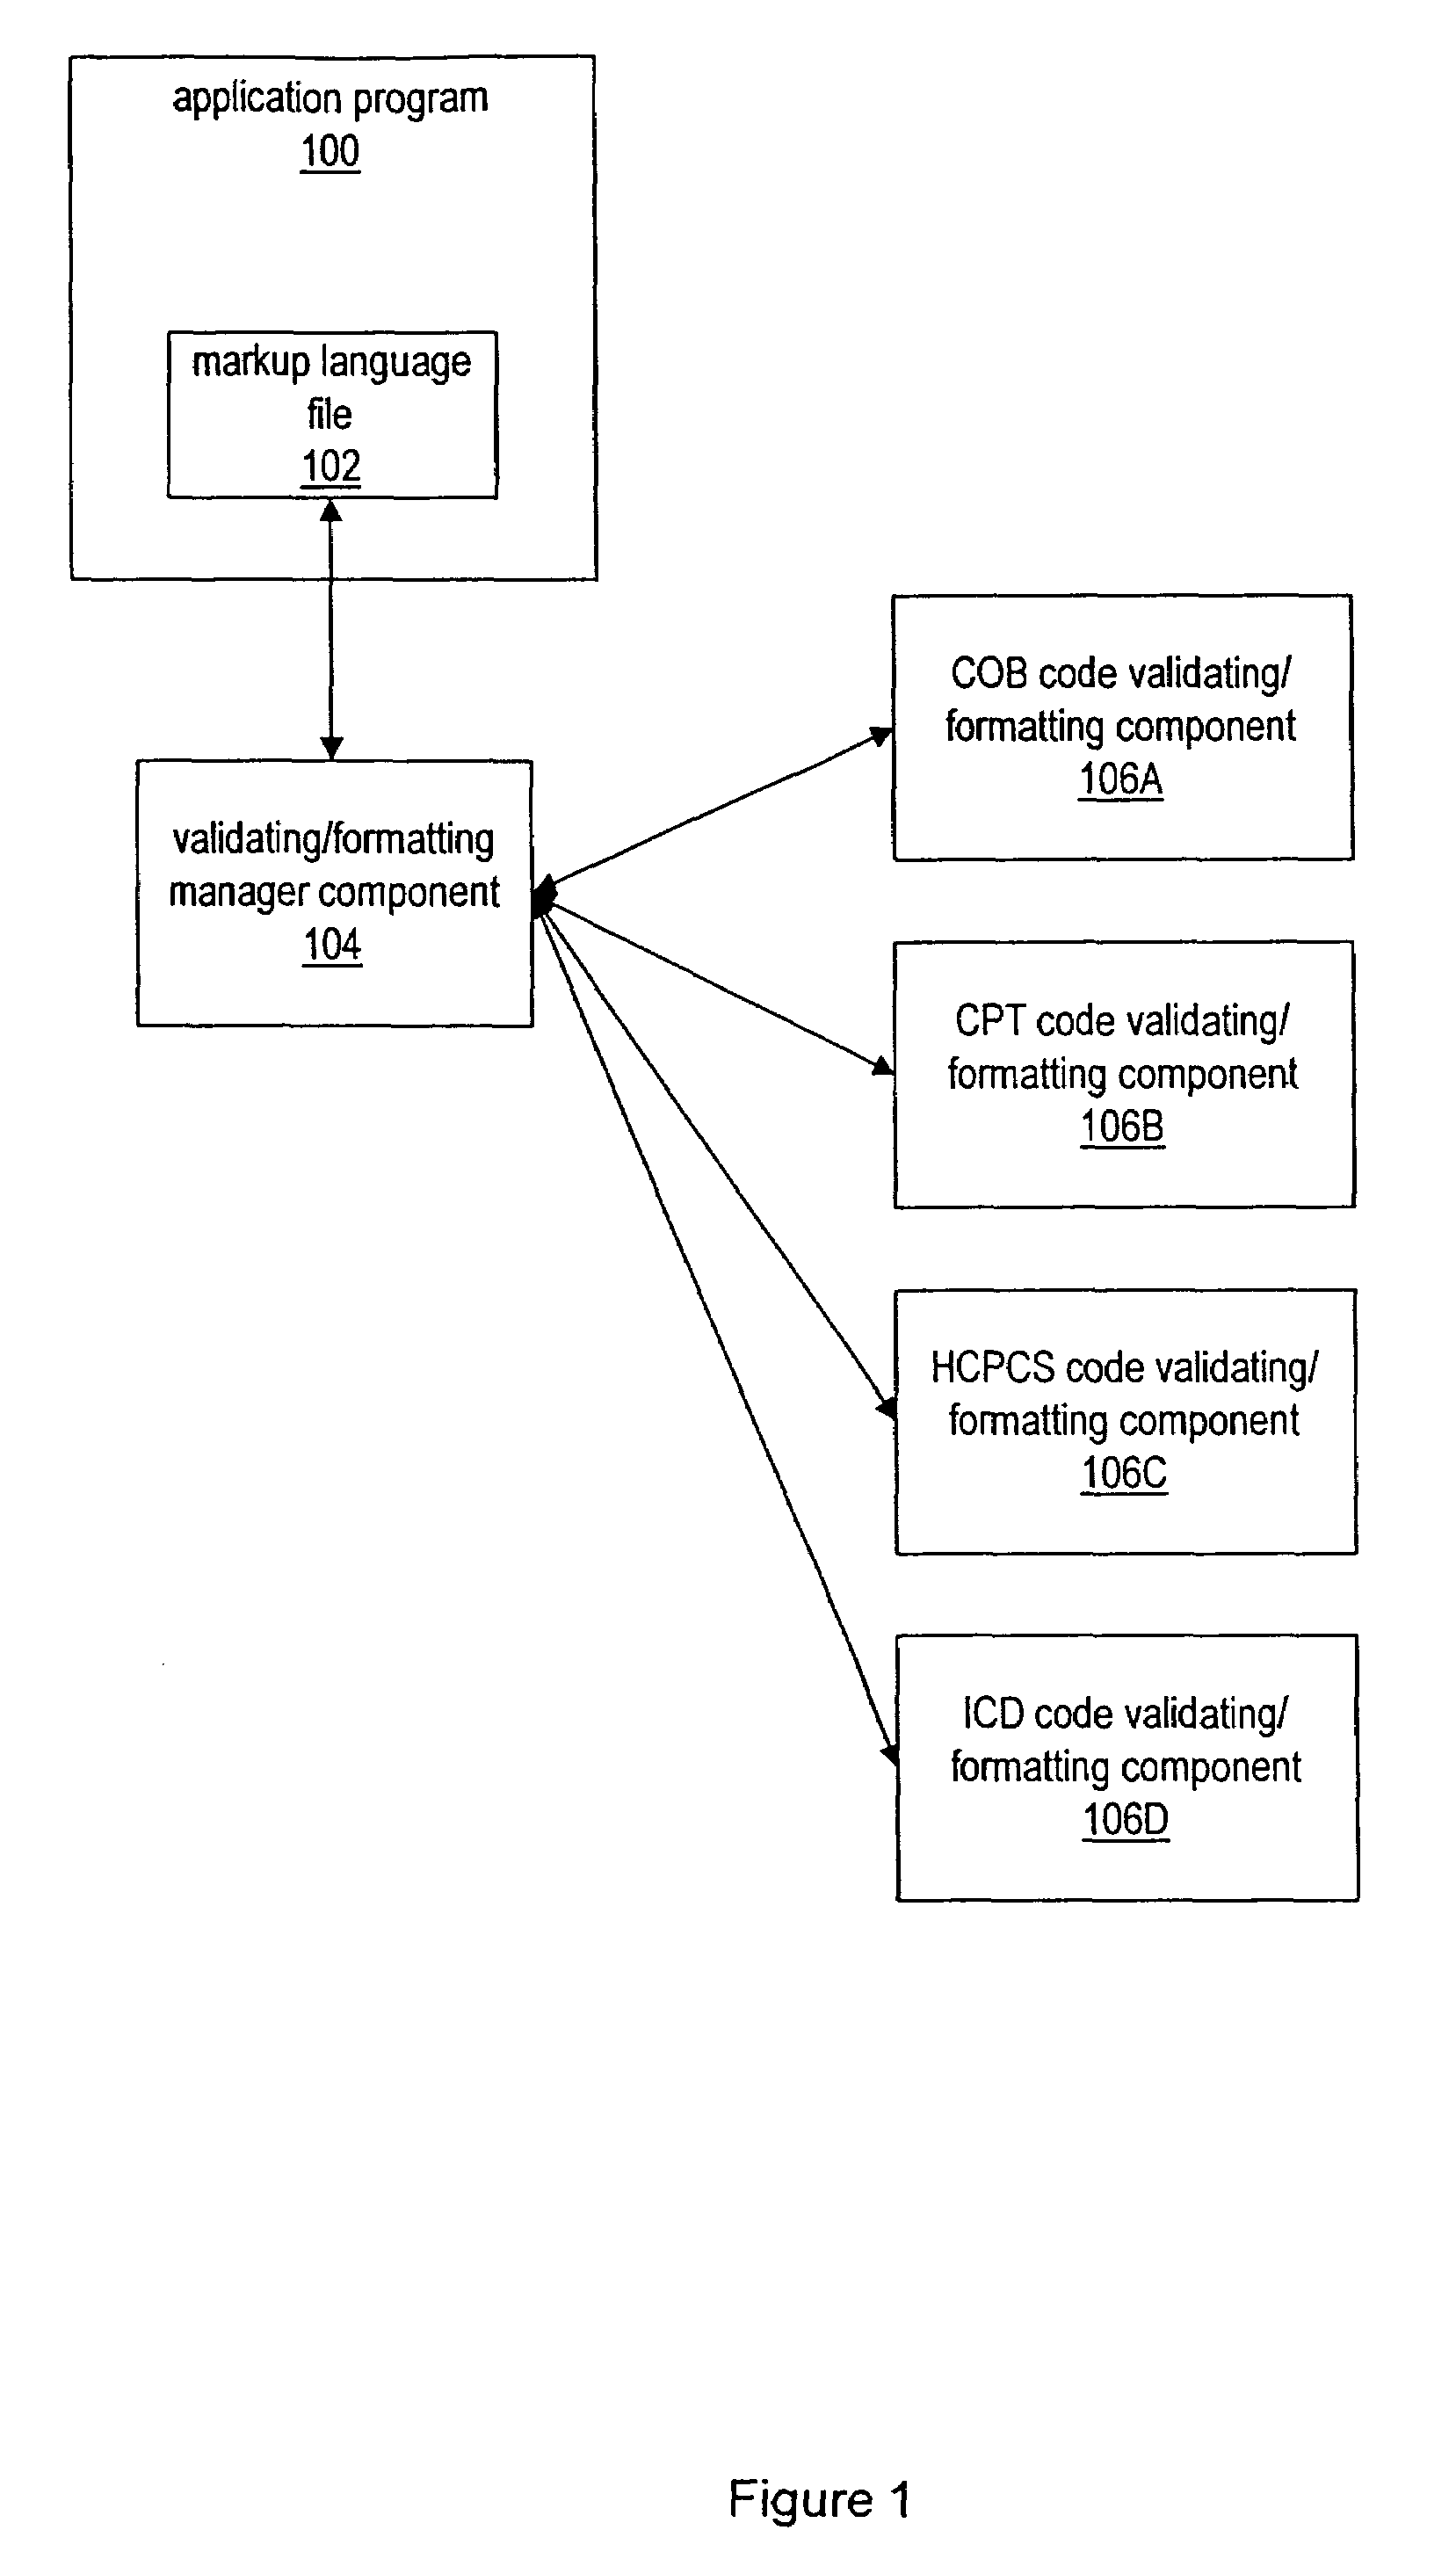 Automatic formatting and validating of text for a markup language graphical user interface